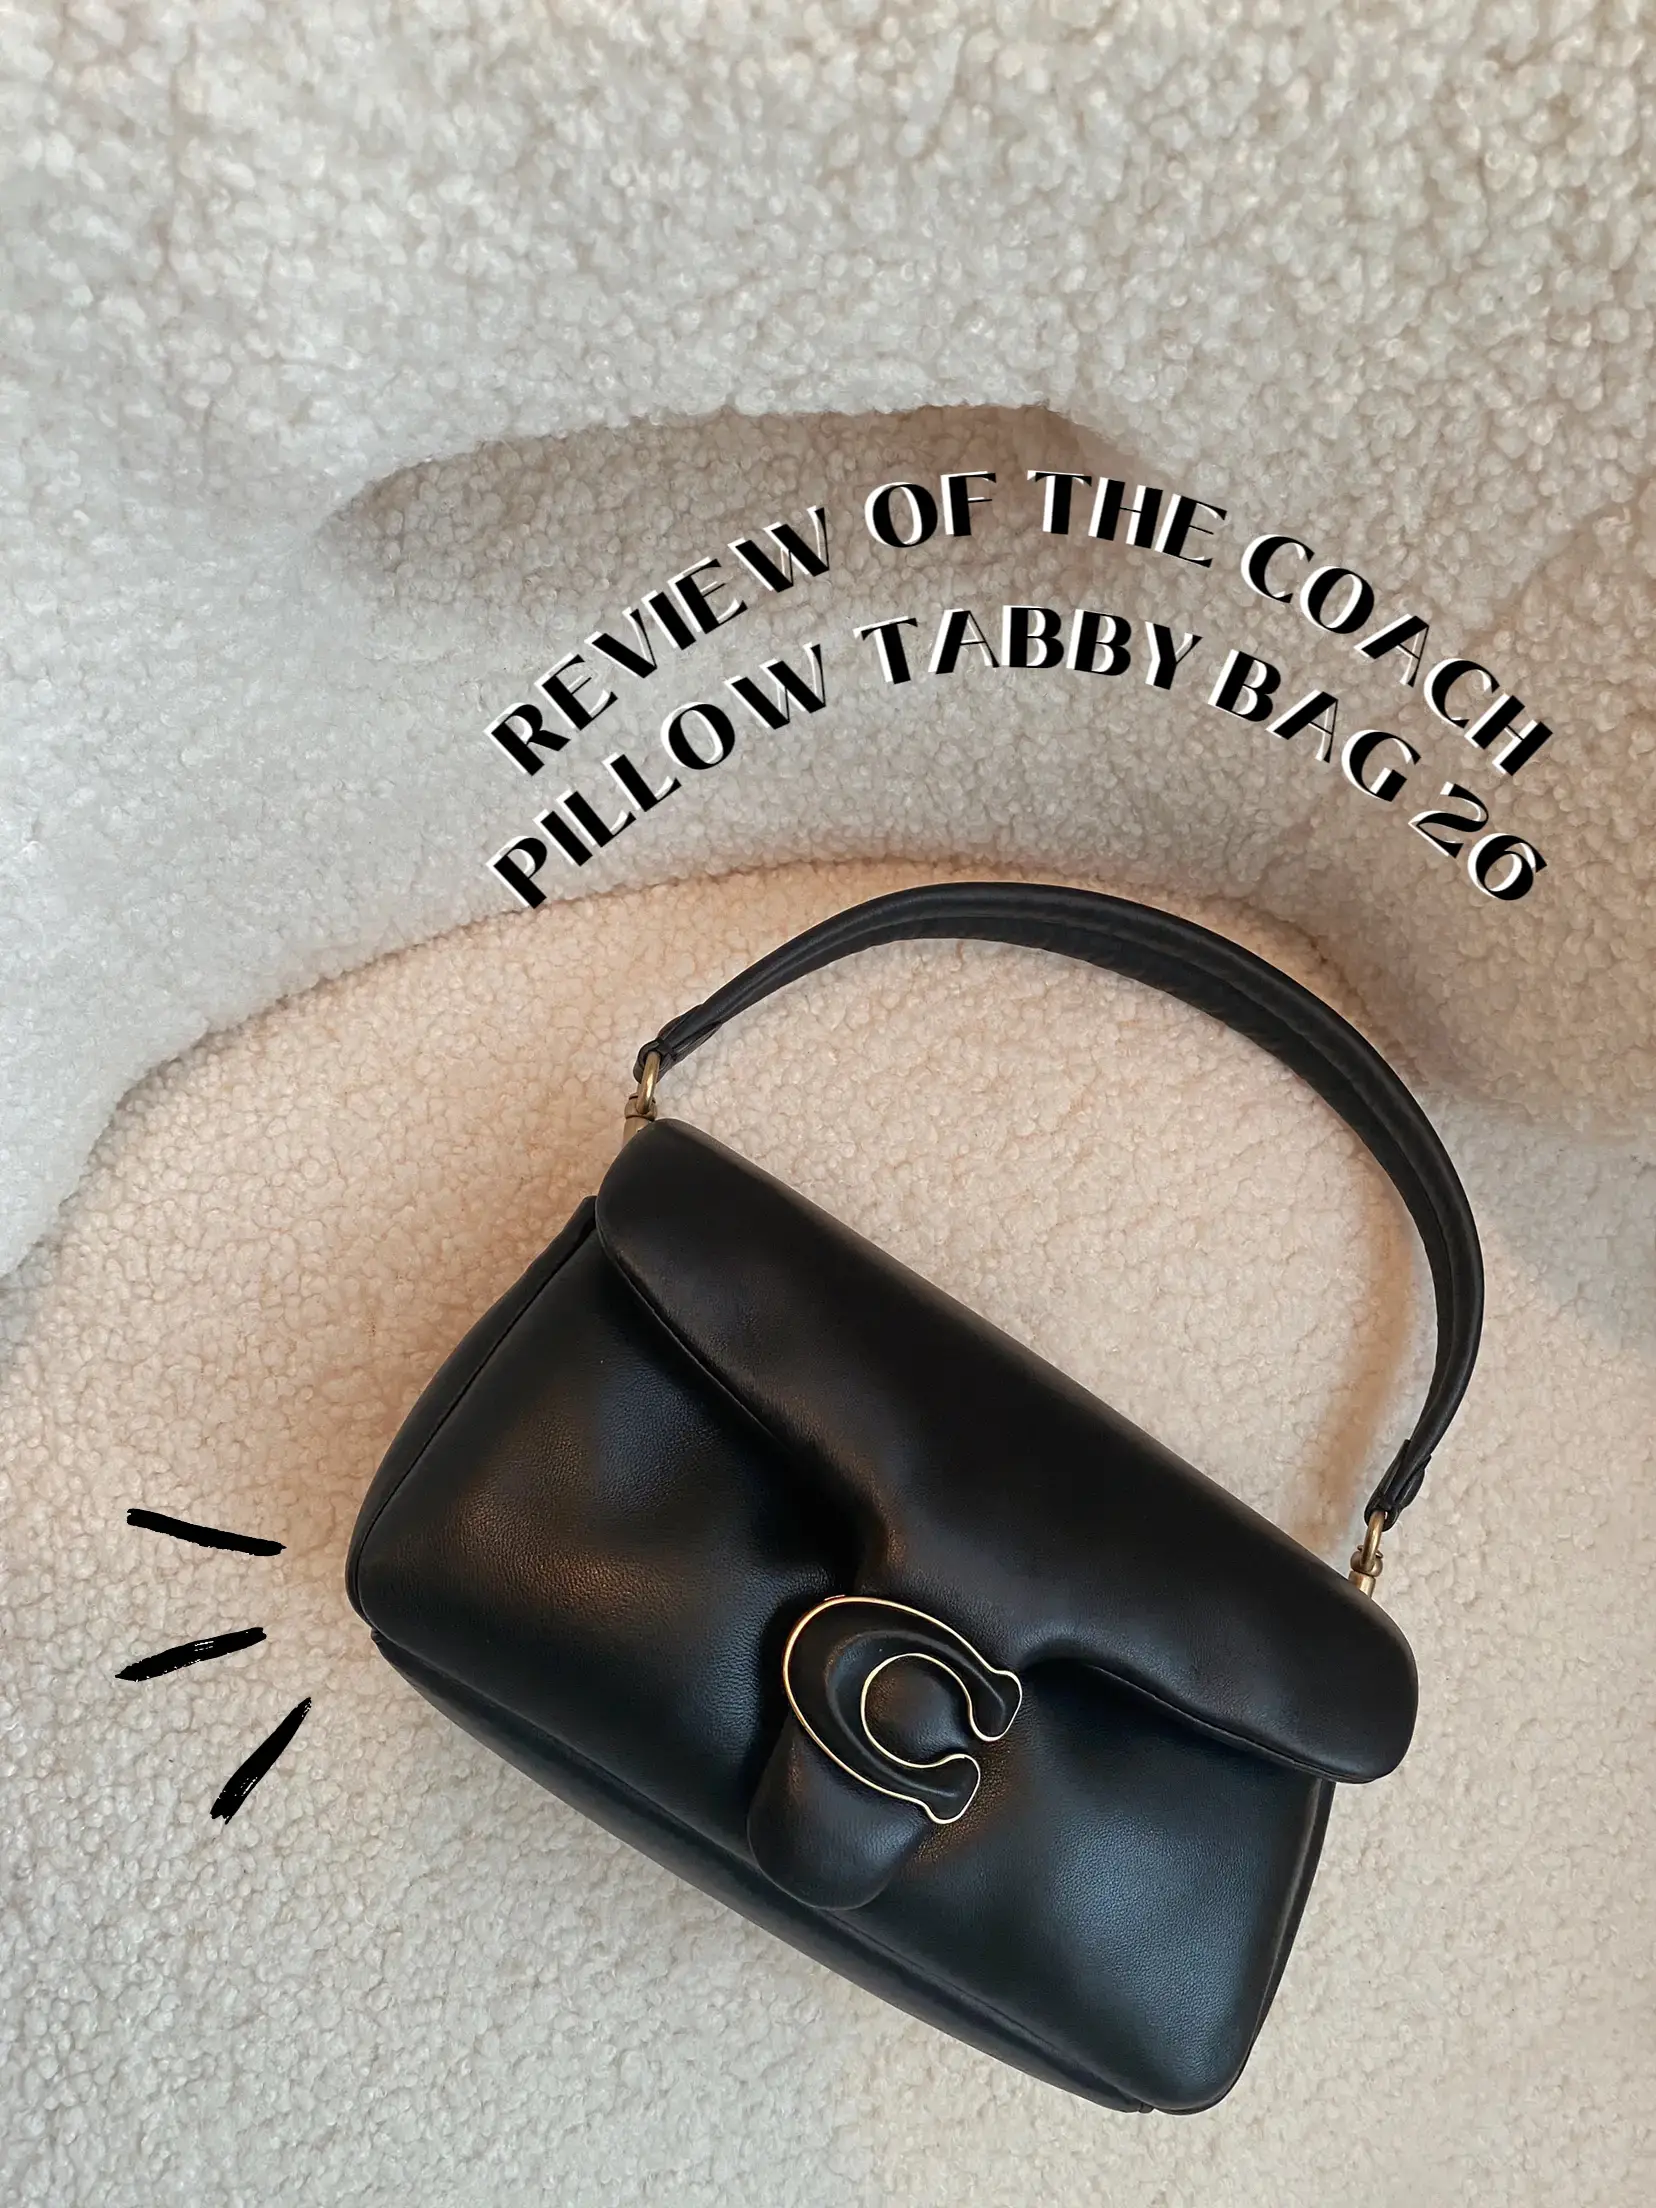 COACH PILLOW TABBY 18 BAG REVIEW WATCH THIS BEFORE YOU BUY IT. Find out if  it's really worth it? 